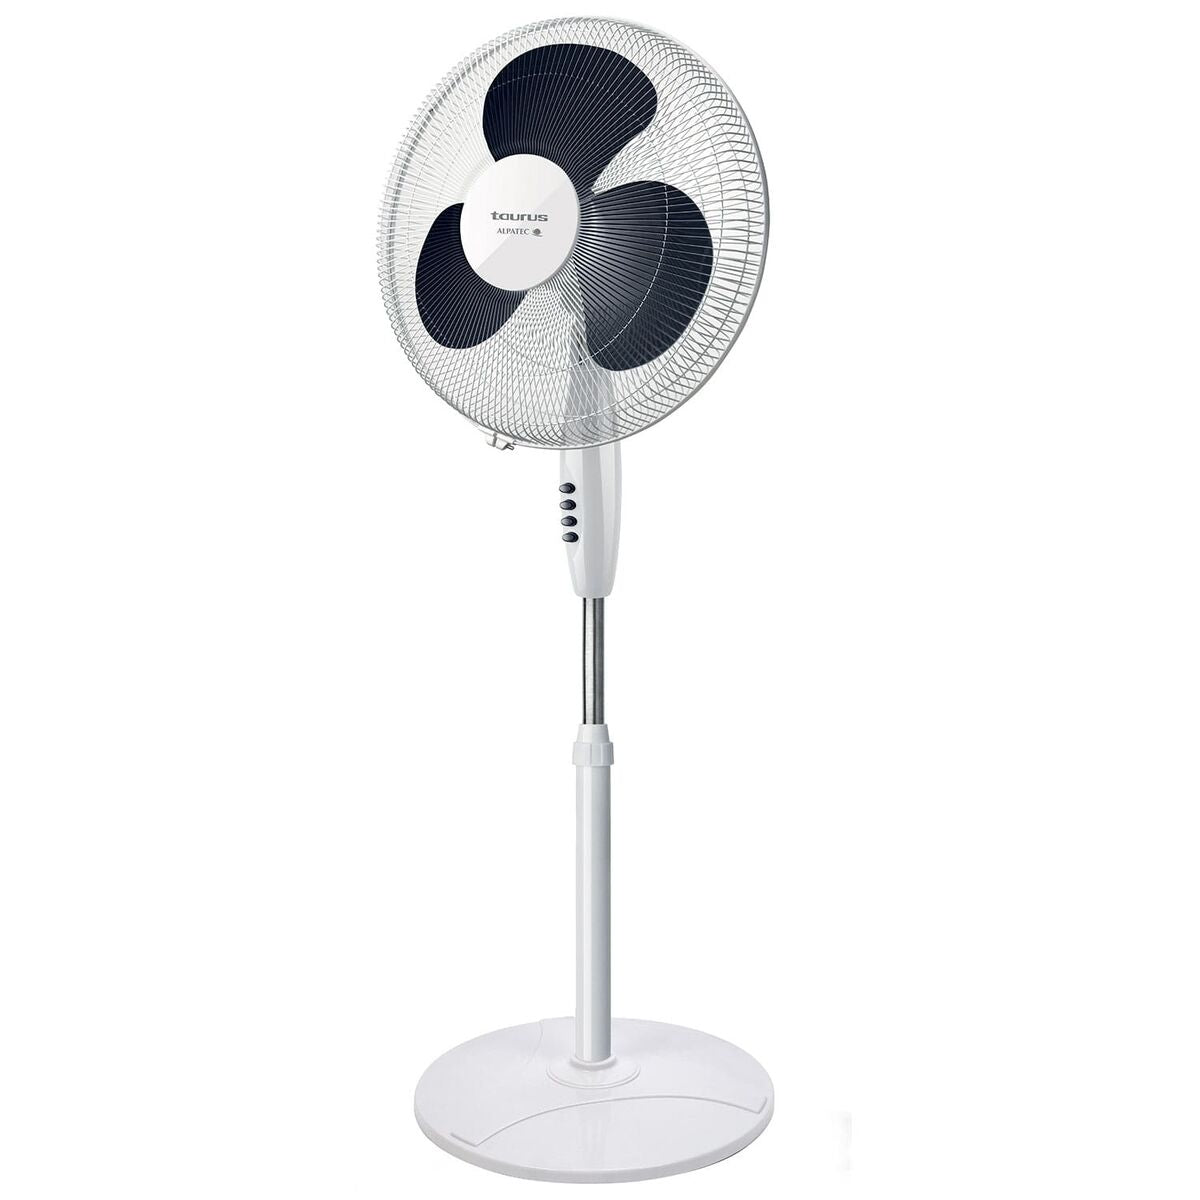 Freestanding Fan Taurus GRECO White 40 W, Taurus, Home and cooking, Portable air conditioning, freestanding-fan-taurus-greco-white-40-w, Brand_Taurus, category-reference-2399, category-reference-2450, category-reference-2451, category-reference-t-19656, category-reference-t-21087, category-reference-t-25217, category-reference-t-29130, Condition_NEW, ferretería, Price_50 - 100, summer, RiotNook